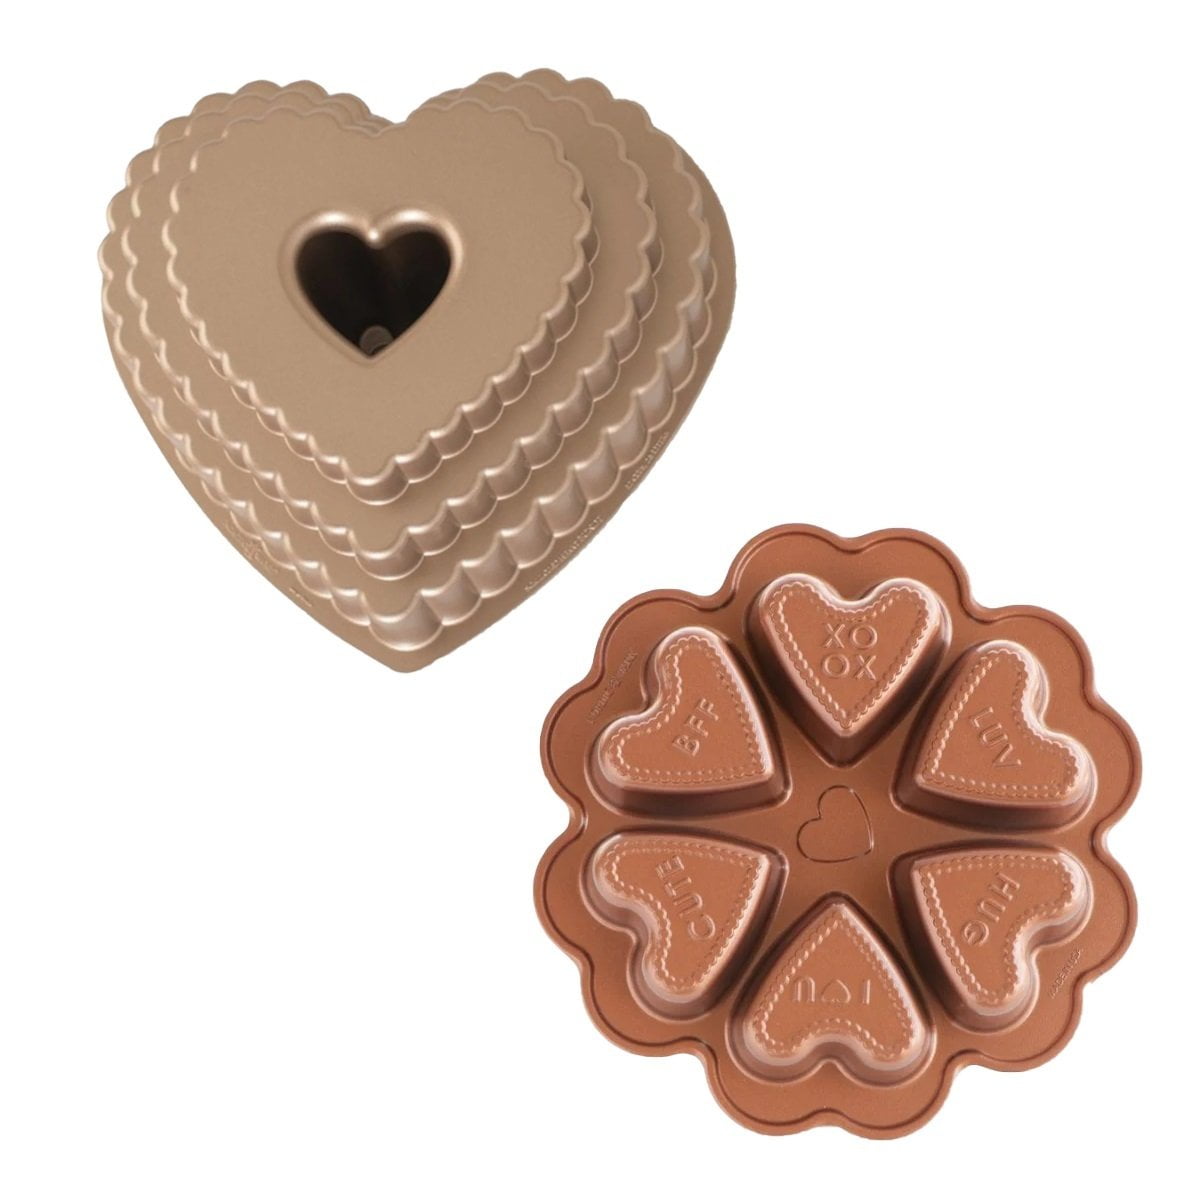  Nordic Ware Cast Bundt Bakeware Tiered Heart Cakelets Toffee,  3-Cup: Home & Kitchen